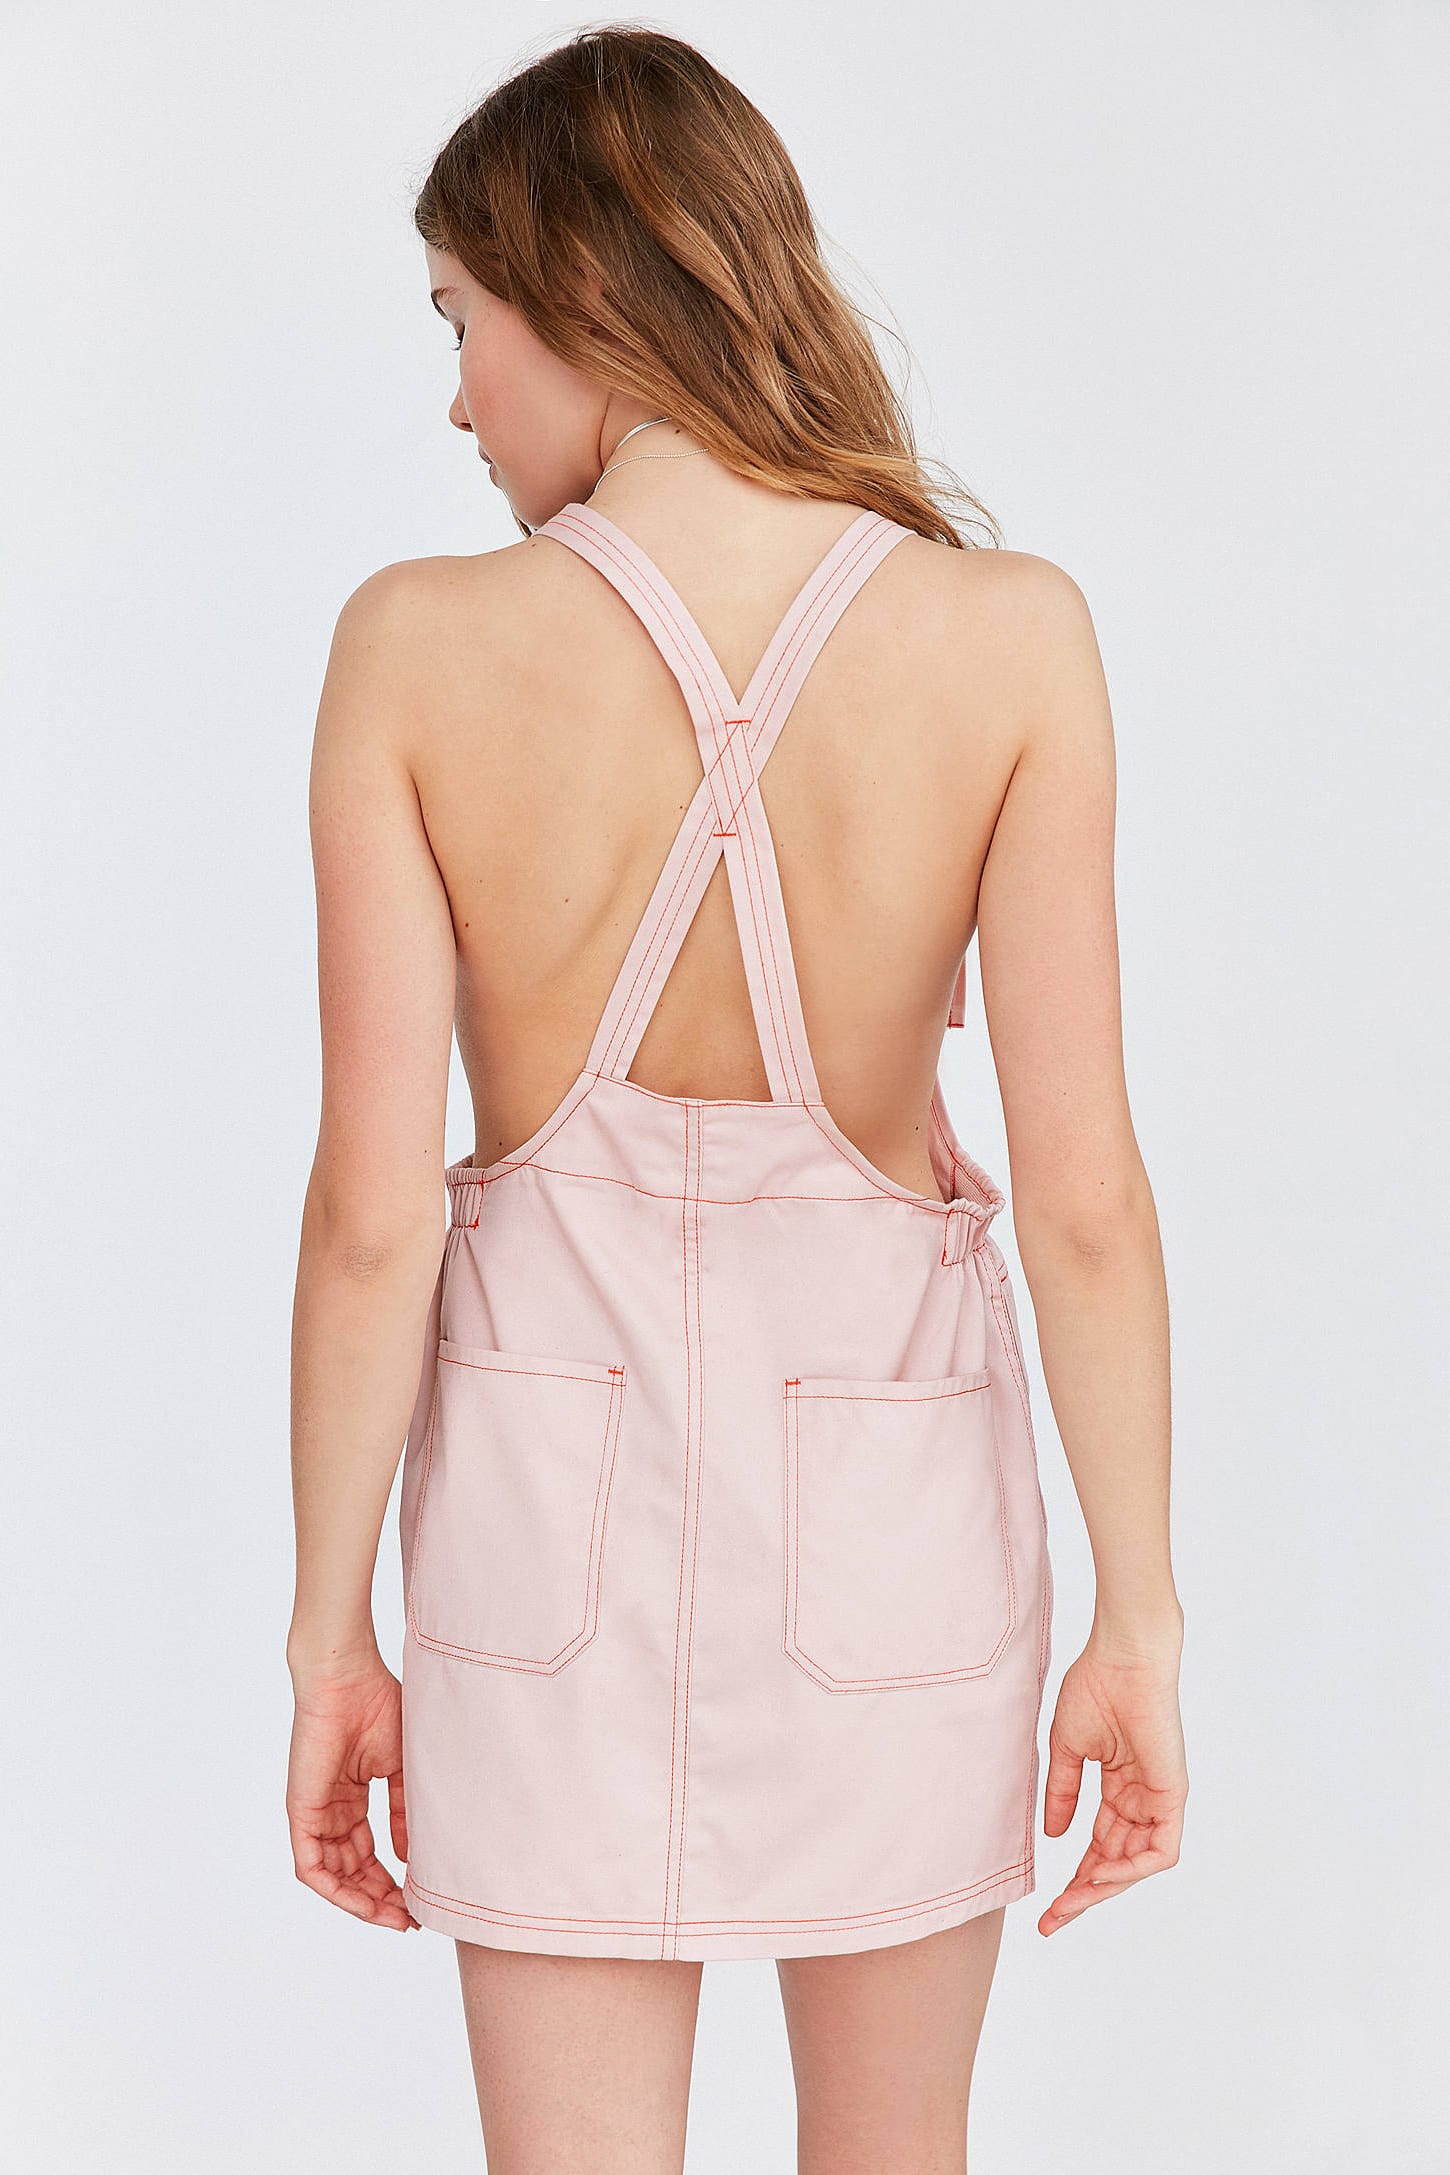 dickies pink overall dress